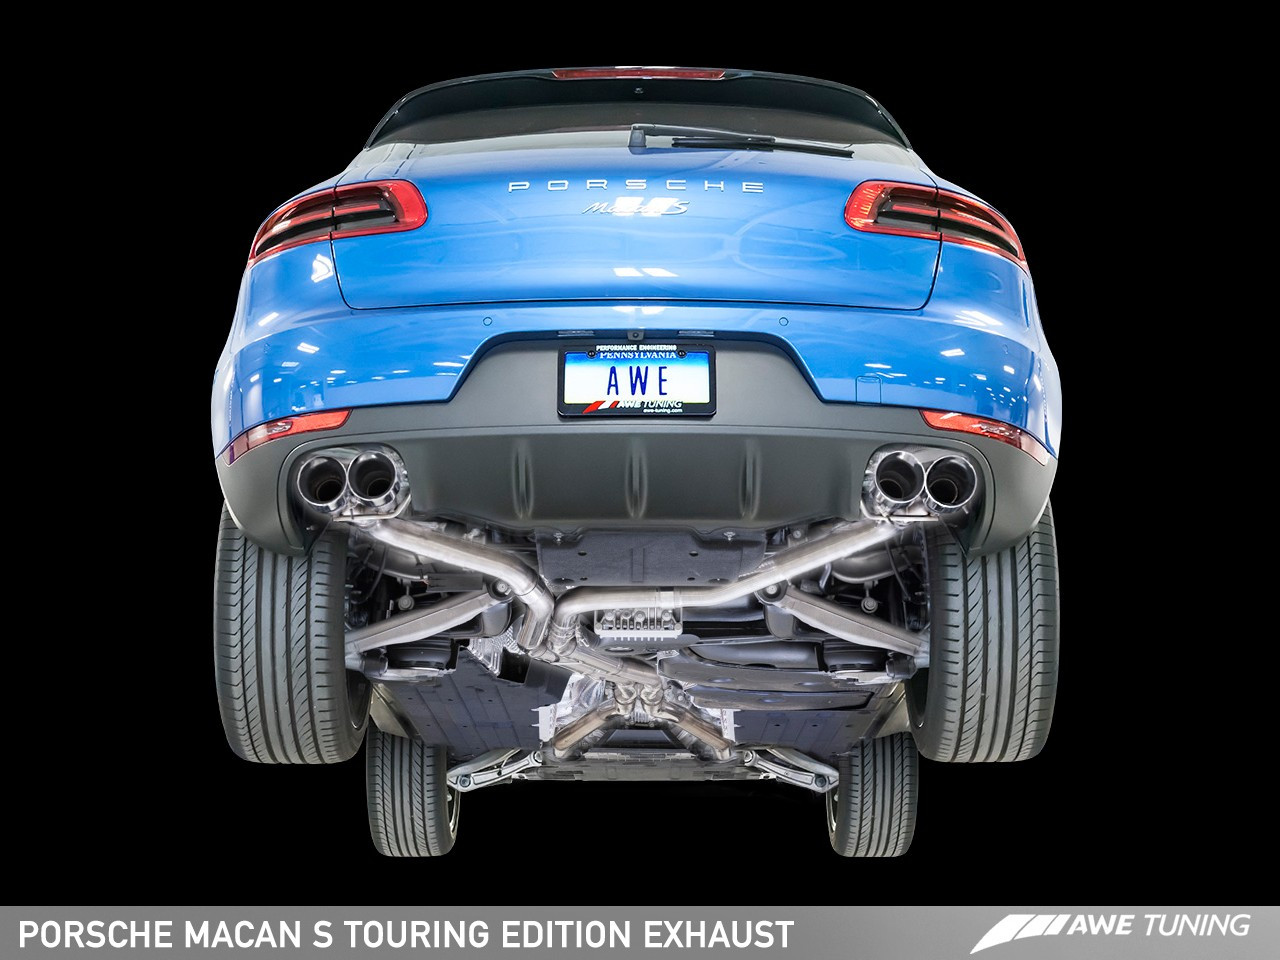 AWE Tuning Porsche Macan S and GTS Touring Edition Exhaust